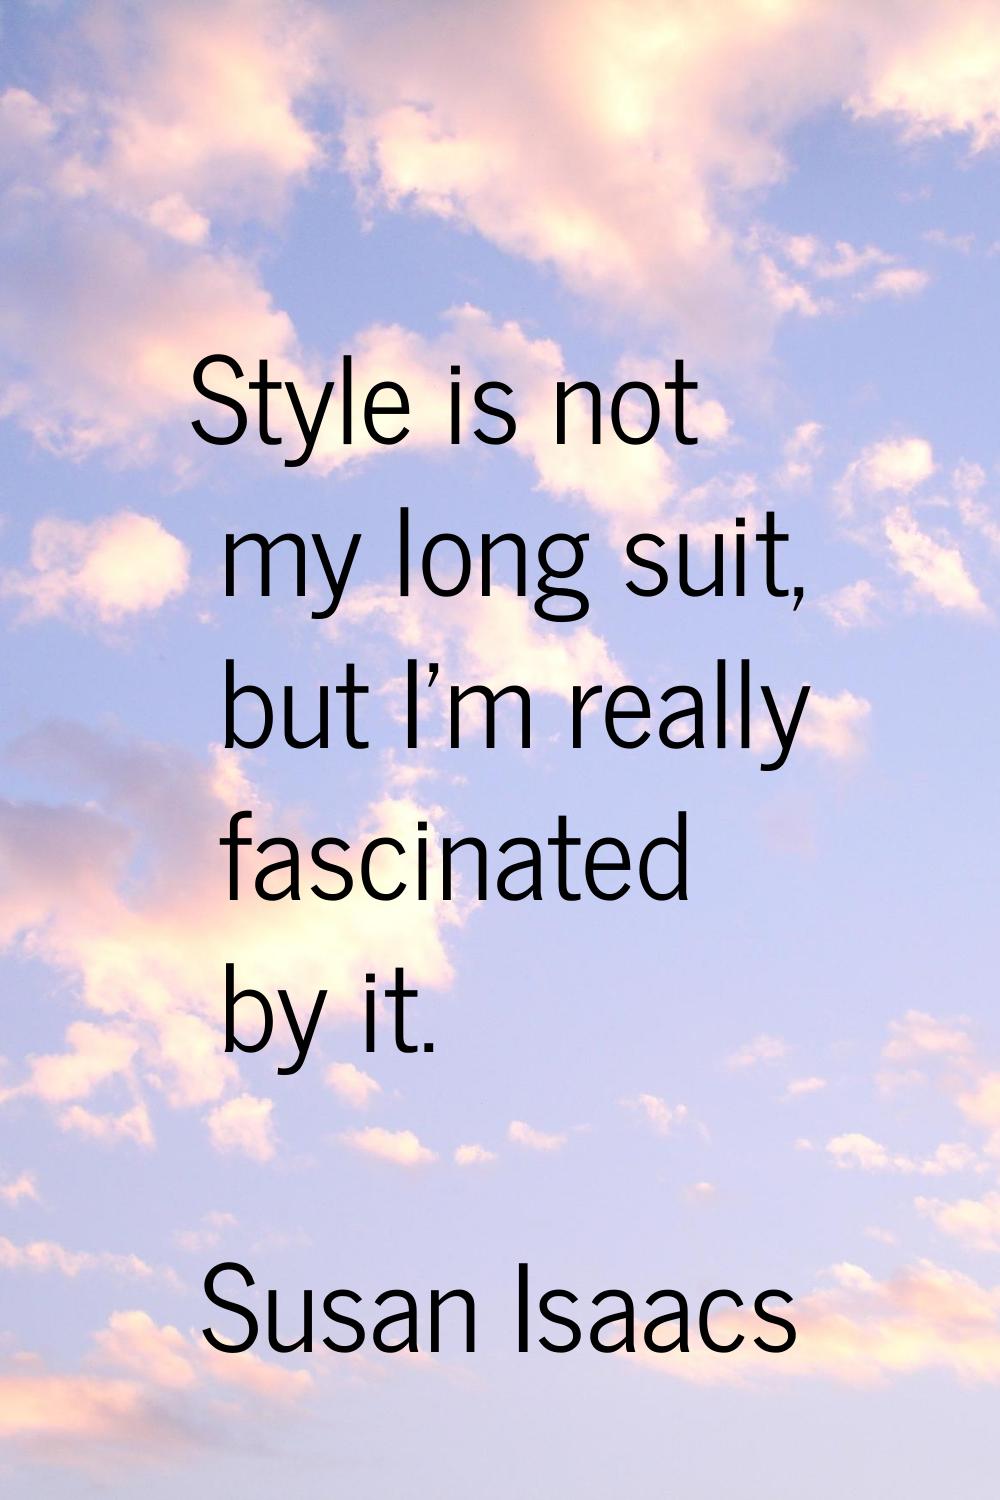 Style is not my long suit, but I'm really fascinated by it.